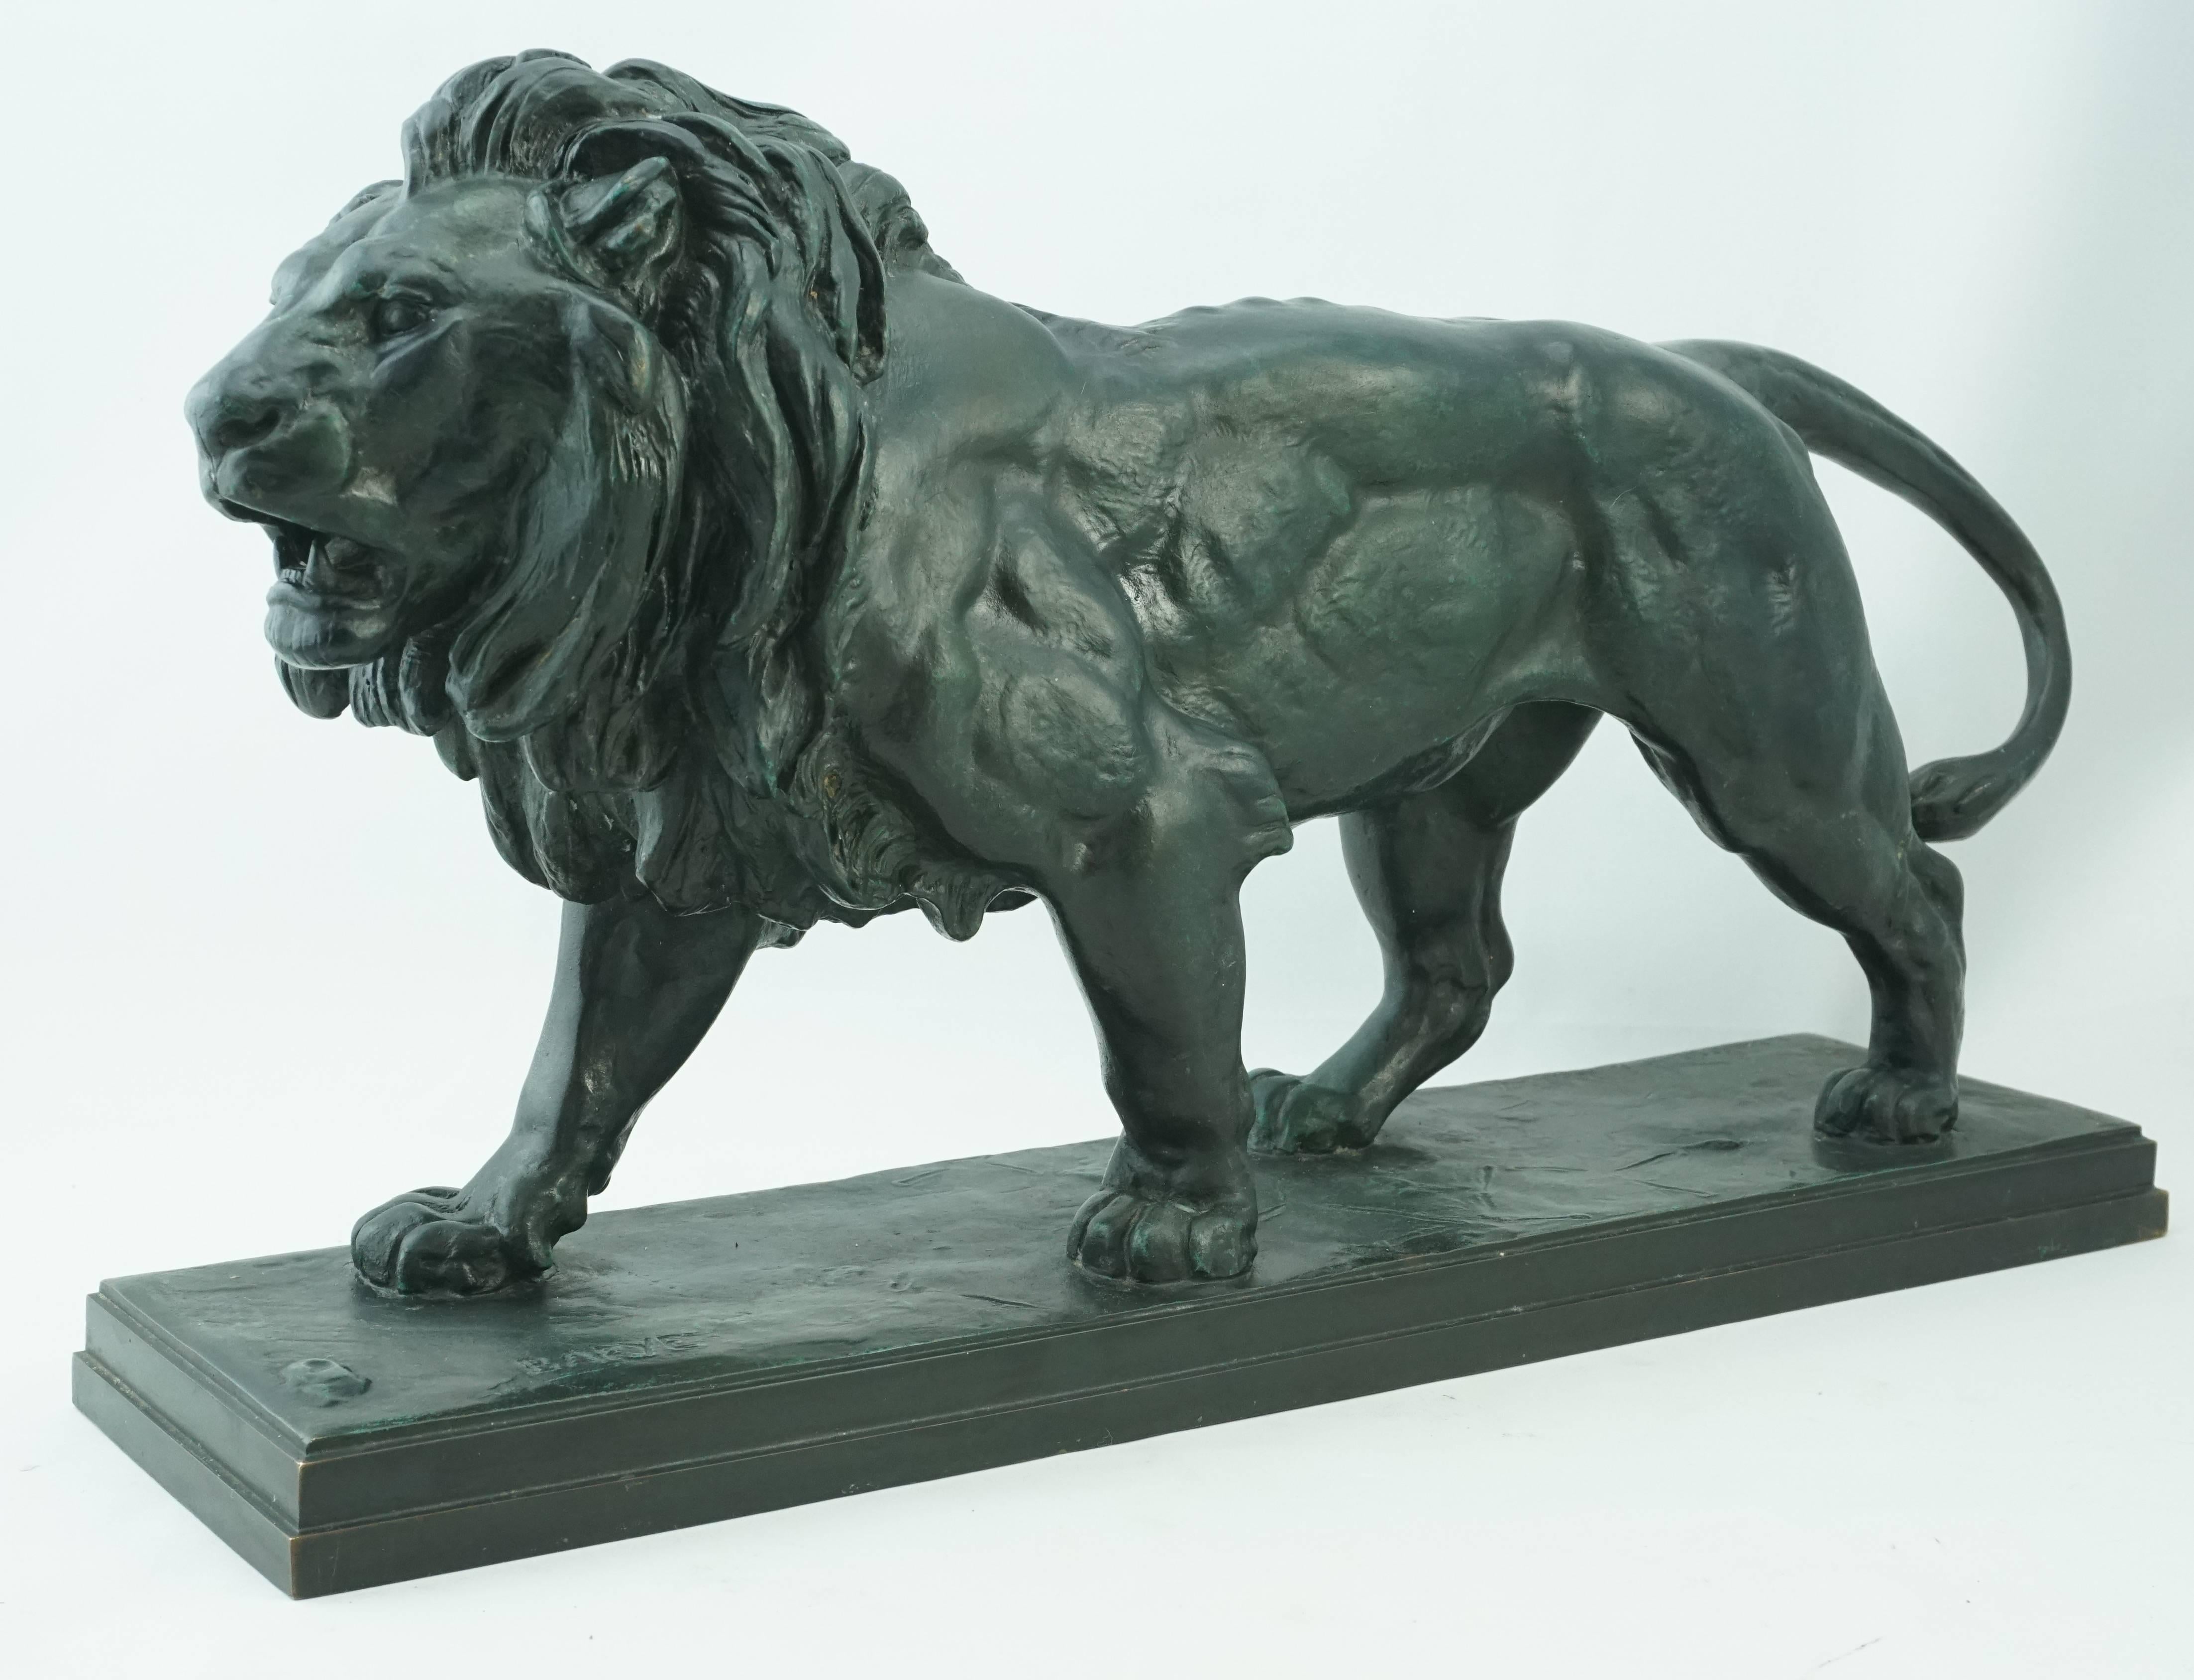 Antoine-Louis Barye (French, 1796-1875) bronze striding lion, F Barbedienne Fondeur foundry, circa 1880. Patinated green patina.

Incised Barye and F. Barbedienne Fondeur and 43 underside 

Dimensions: 15.5 inches wide, 9 inches high, 4.2 inches